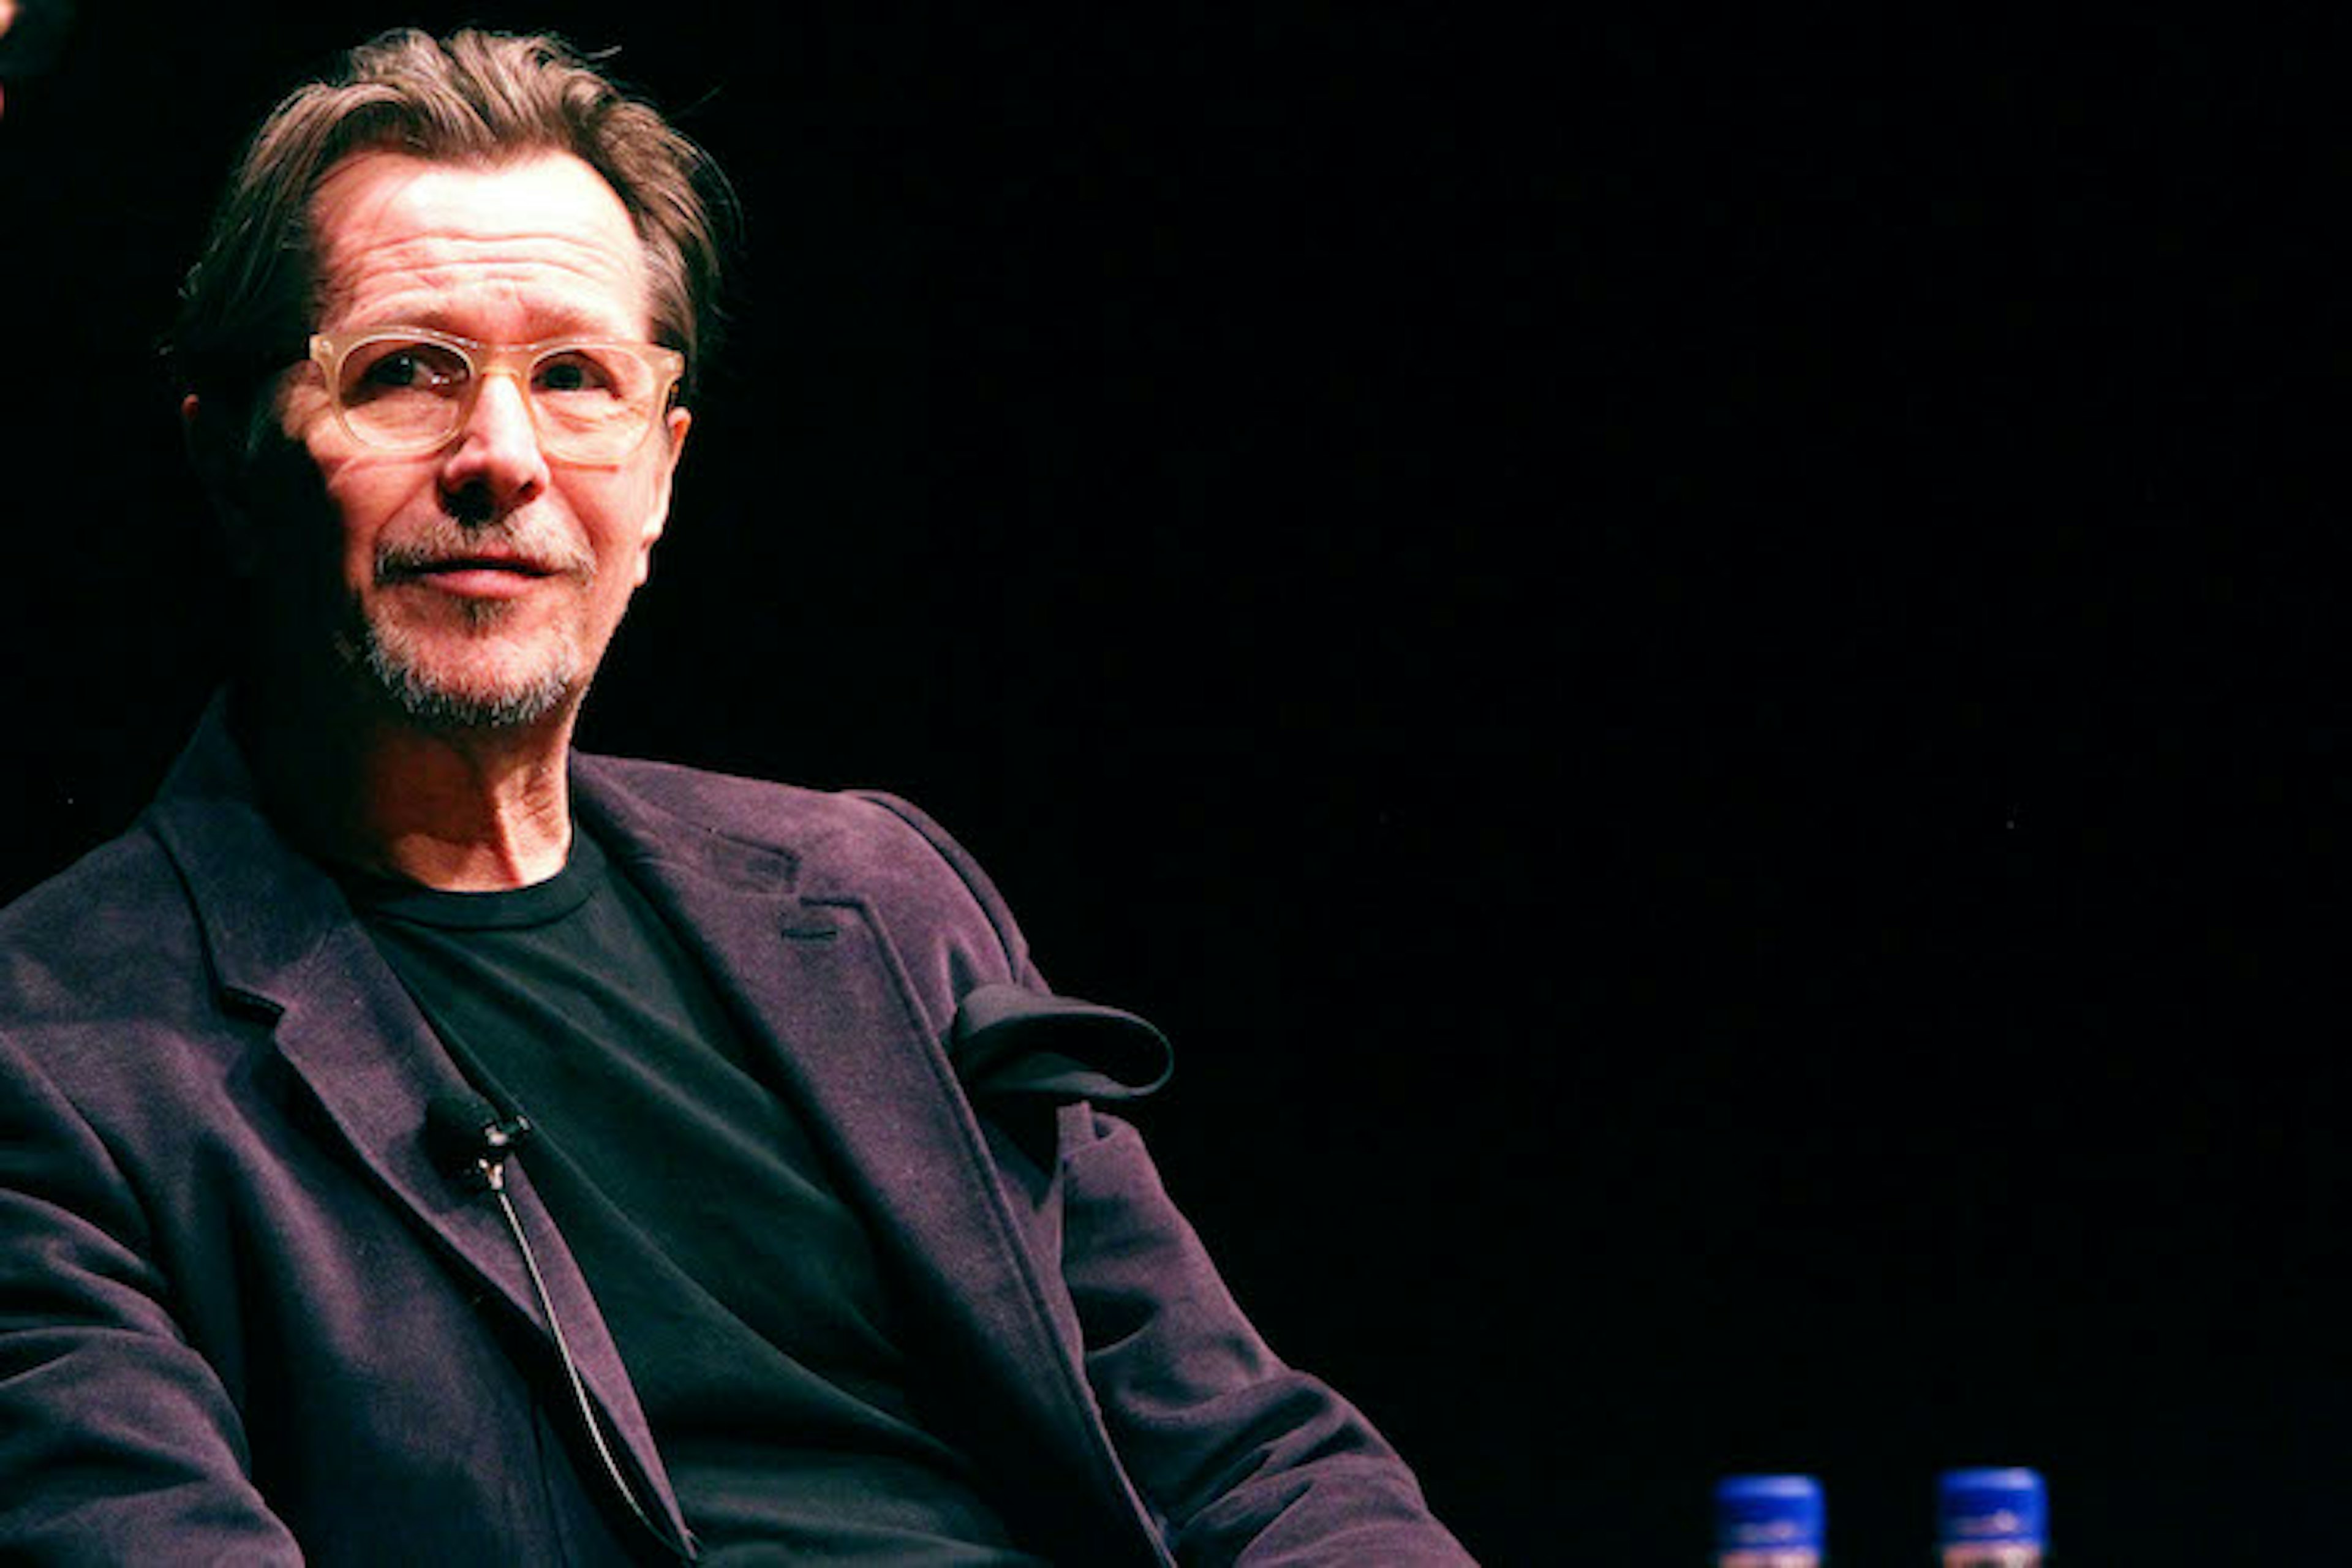 The 23rd Annual Palm Springs International Film Festival - Talking Pictures: Q&A With Gary Oldman